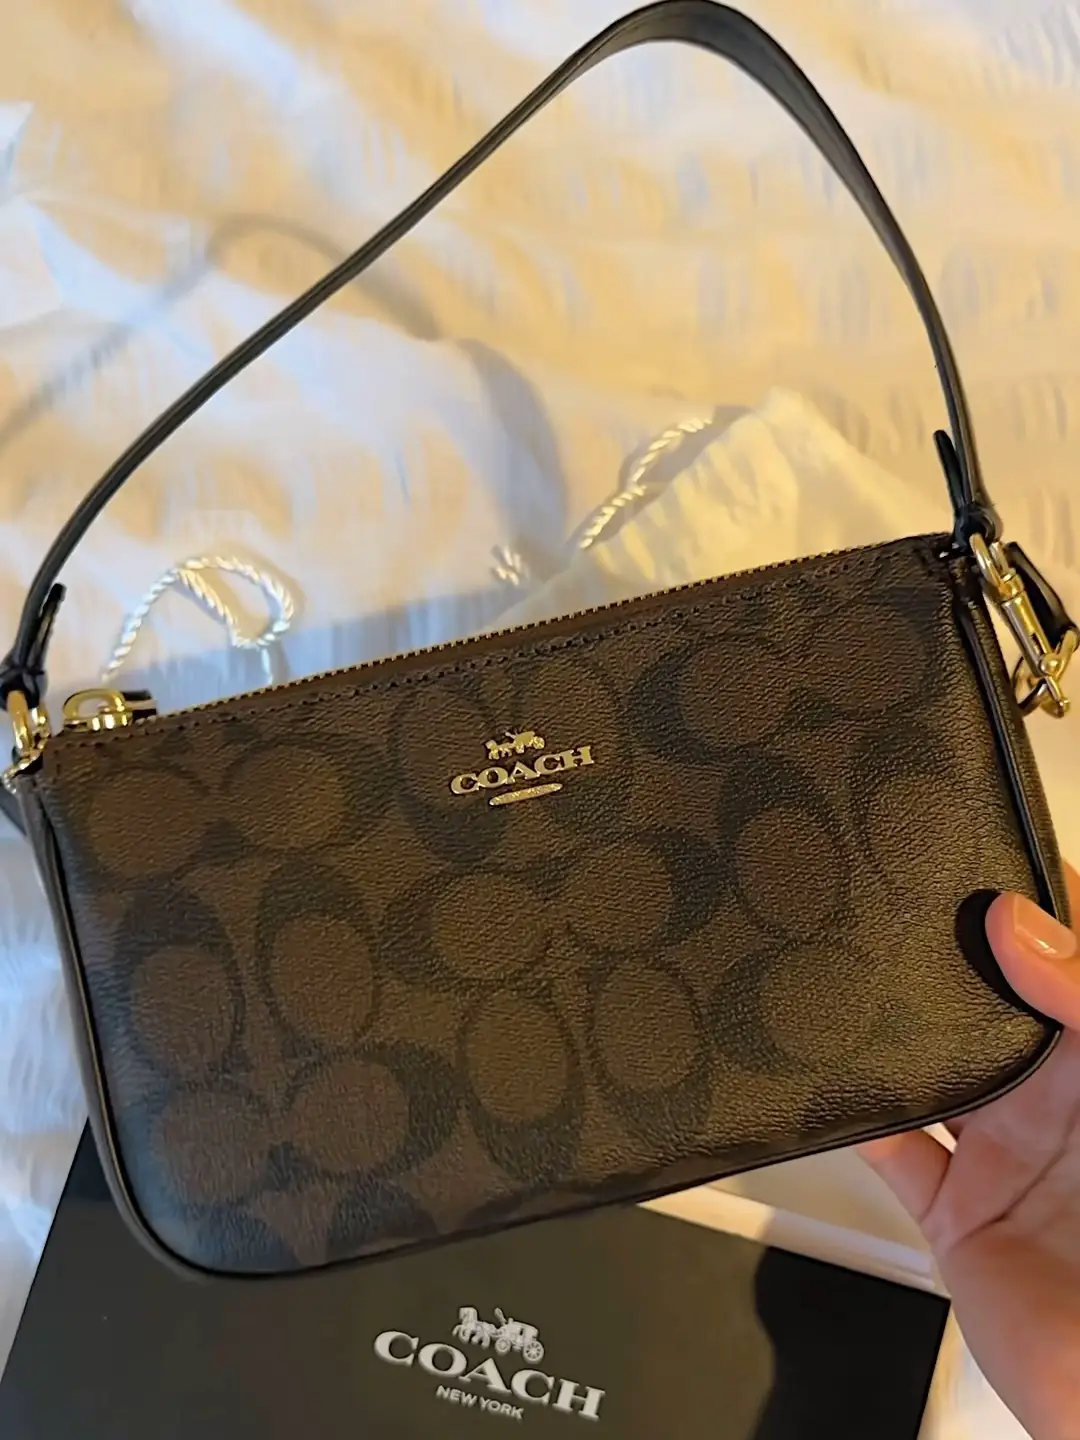 Shopping Haul in NYC at Gucci, Louis Vuitton, Chanel, Dior, Saks